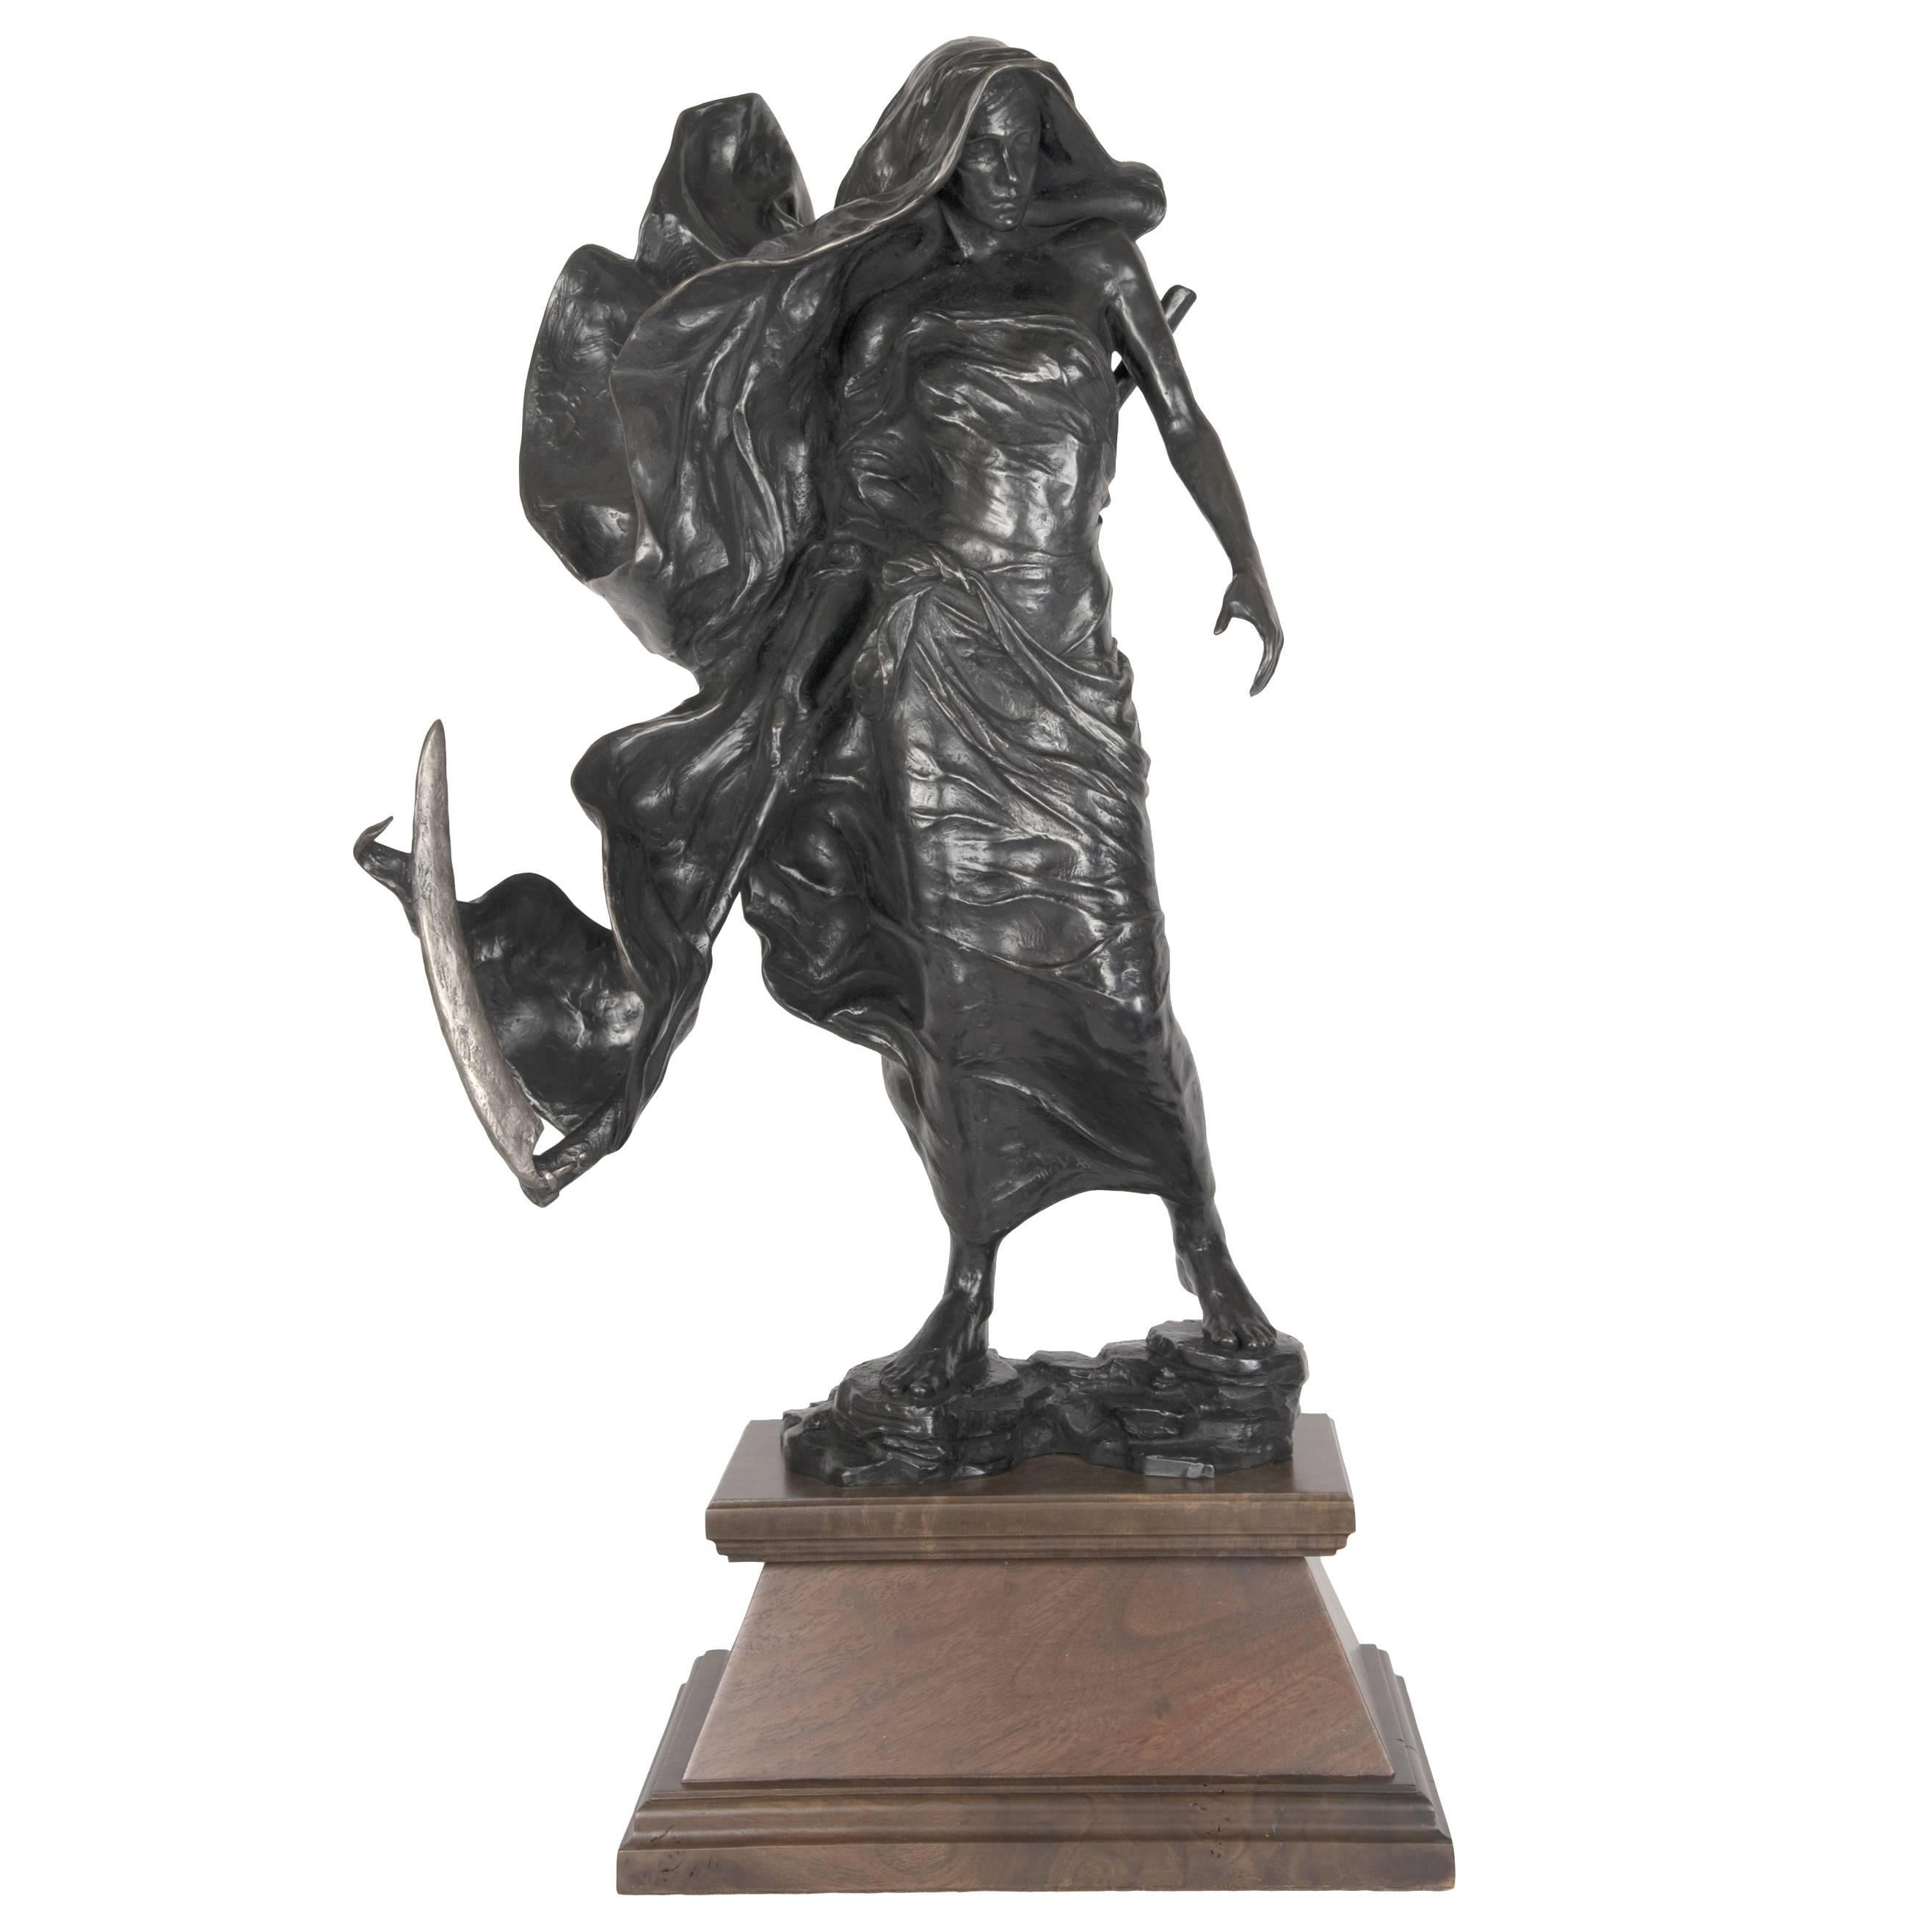 21st Century Bronze of the Reaper by Tyson Snow